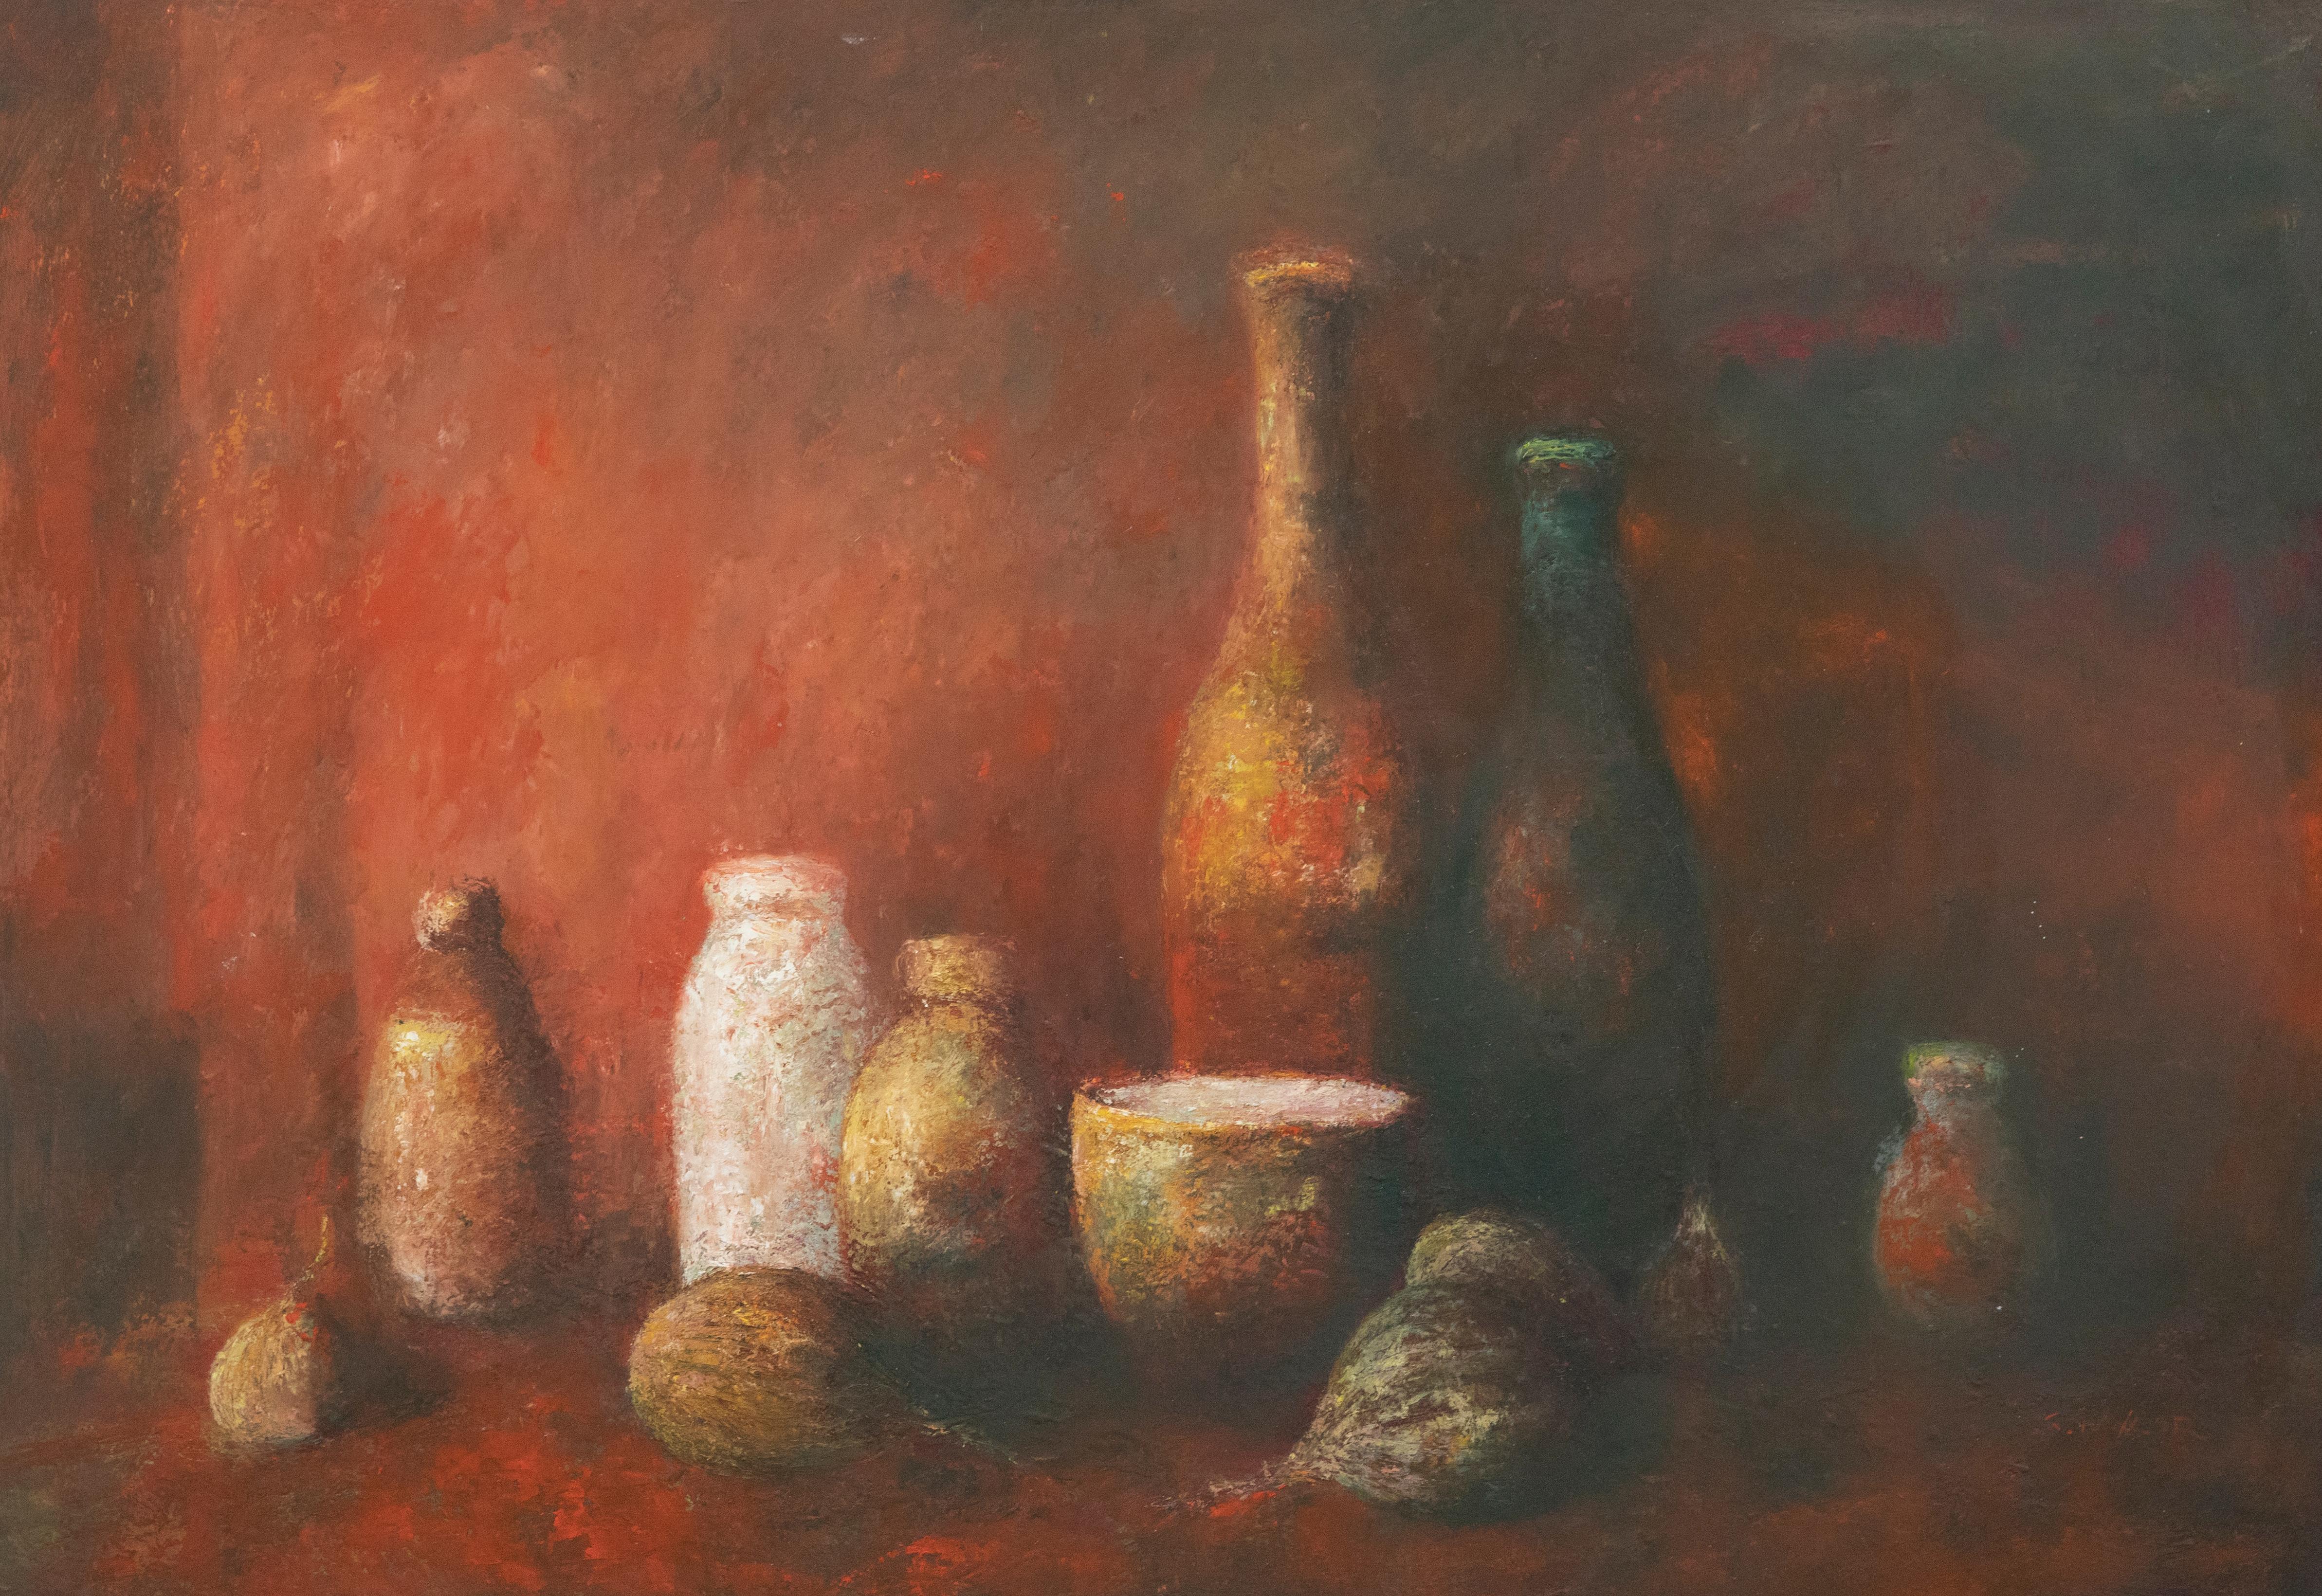 Unknown Still-Life Painting - S. Taylor - 20th Century Oil, Still Life with Bottles & Onions